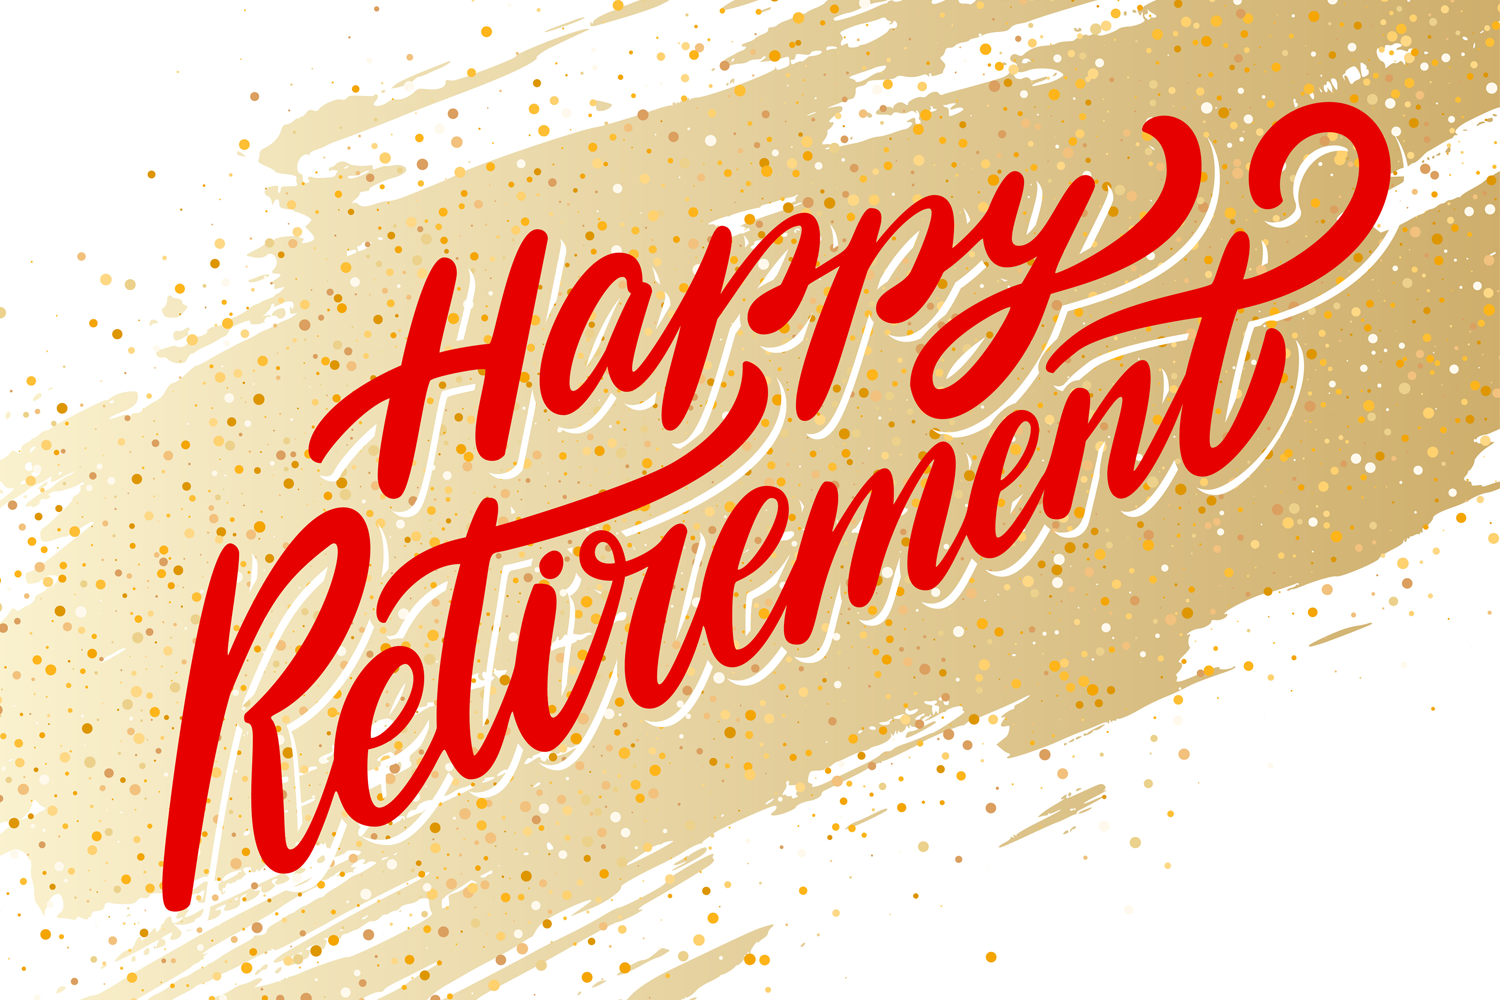 Happy Retirement to all those starting a new chapter!